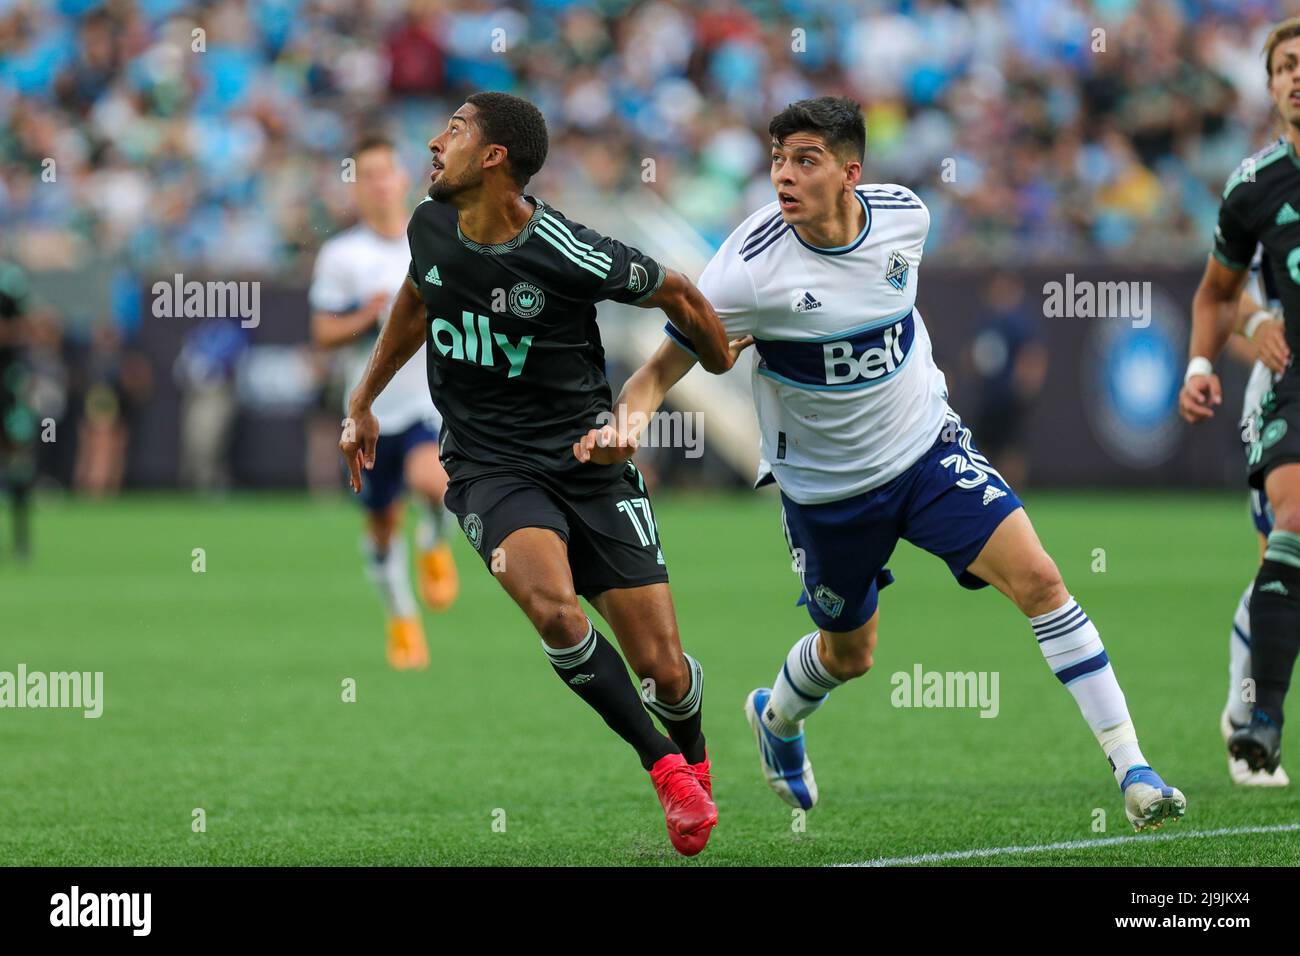 CHARLOTTE, NC - MAY 22: McKinze Gaines (17) of Charlotte FC and CristiÃ¡n GutiÃ©rrez (3) of Vancouver Whitecaps chase down a high kicked ball during a soccer match between the Charlotte FC and the Vancouver Whitecaps on May 22, 2022 at Bank of America Stadium in Charlotte, NC. (Credit Image: © David Jensen/Icon SMI via ZUMA Press) Stock Photo